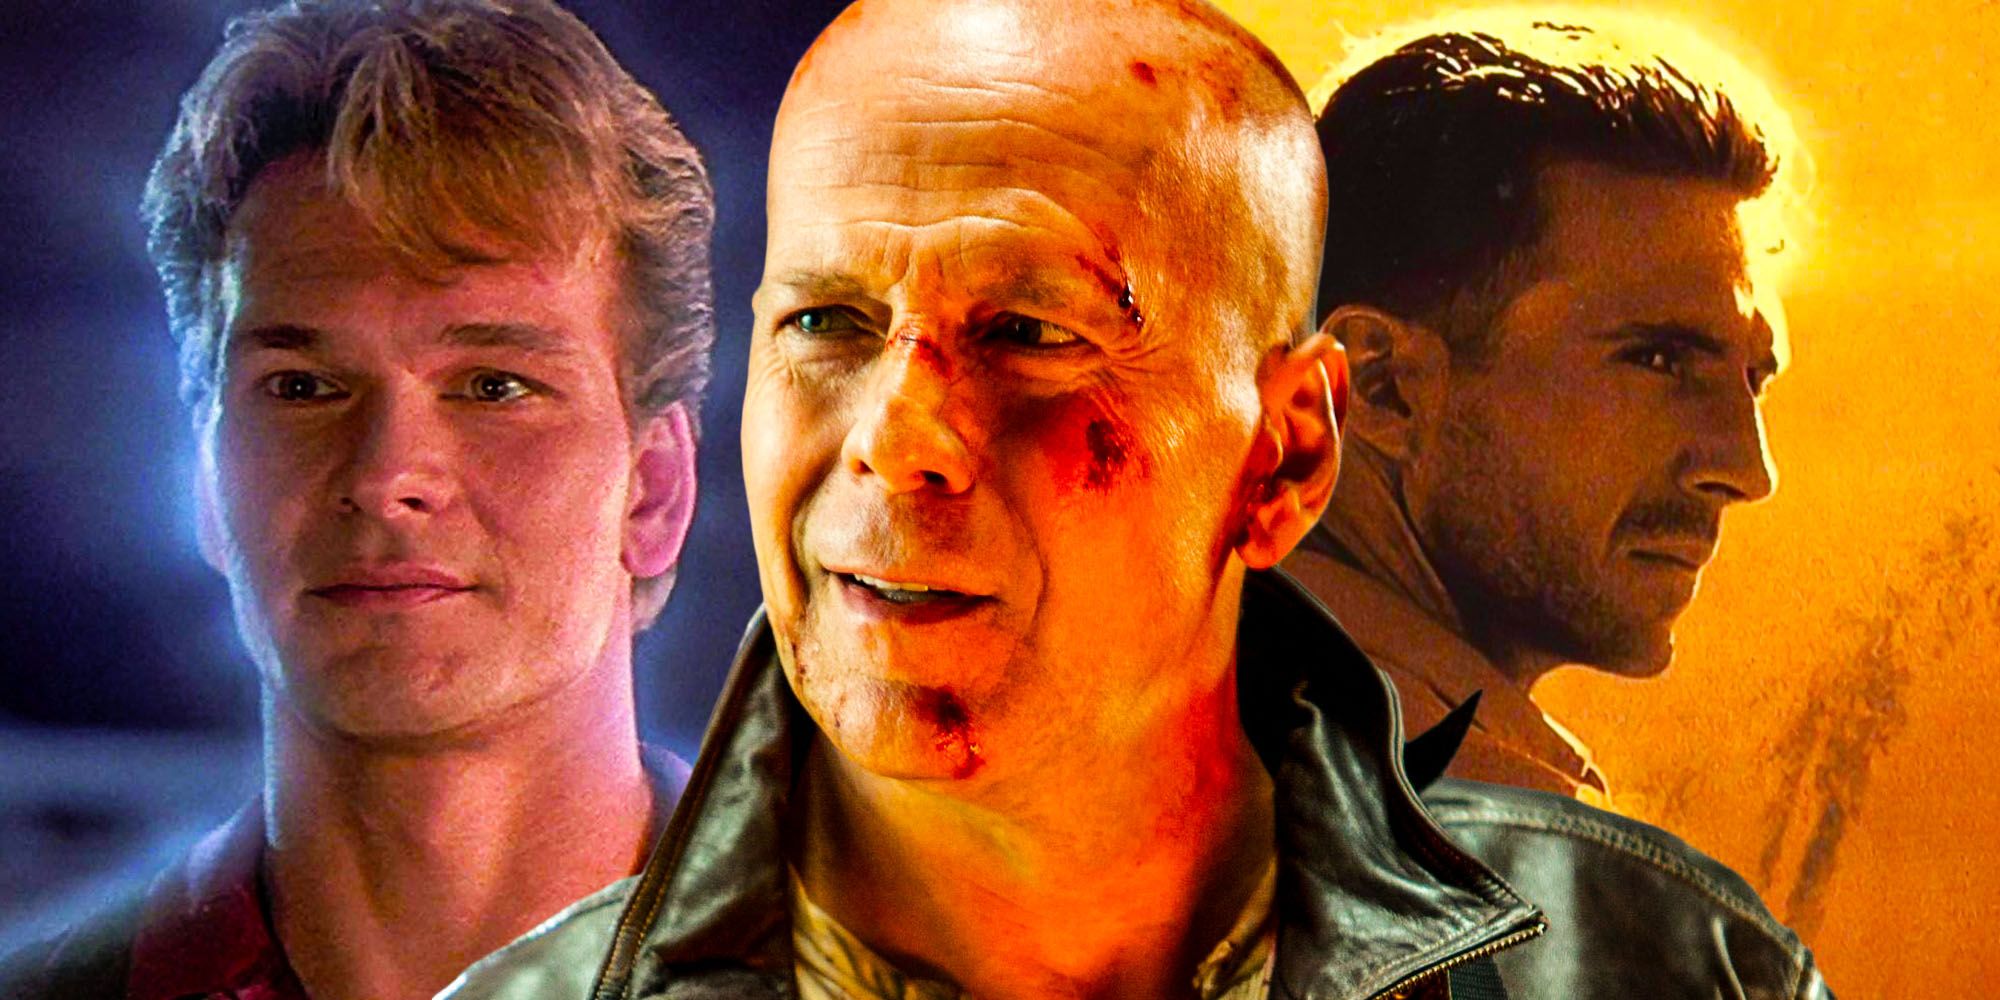 Bruce Willis roles regret turning down Ghost the english patient